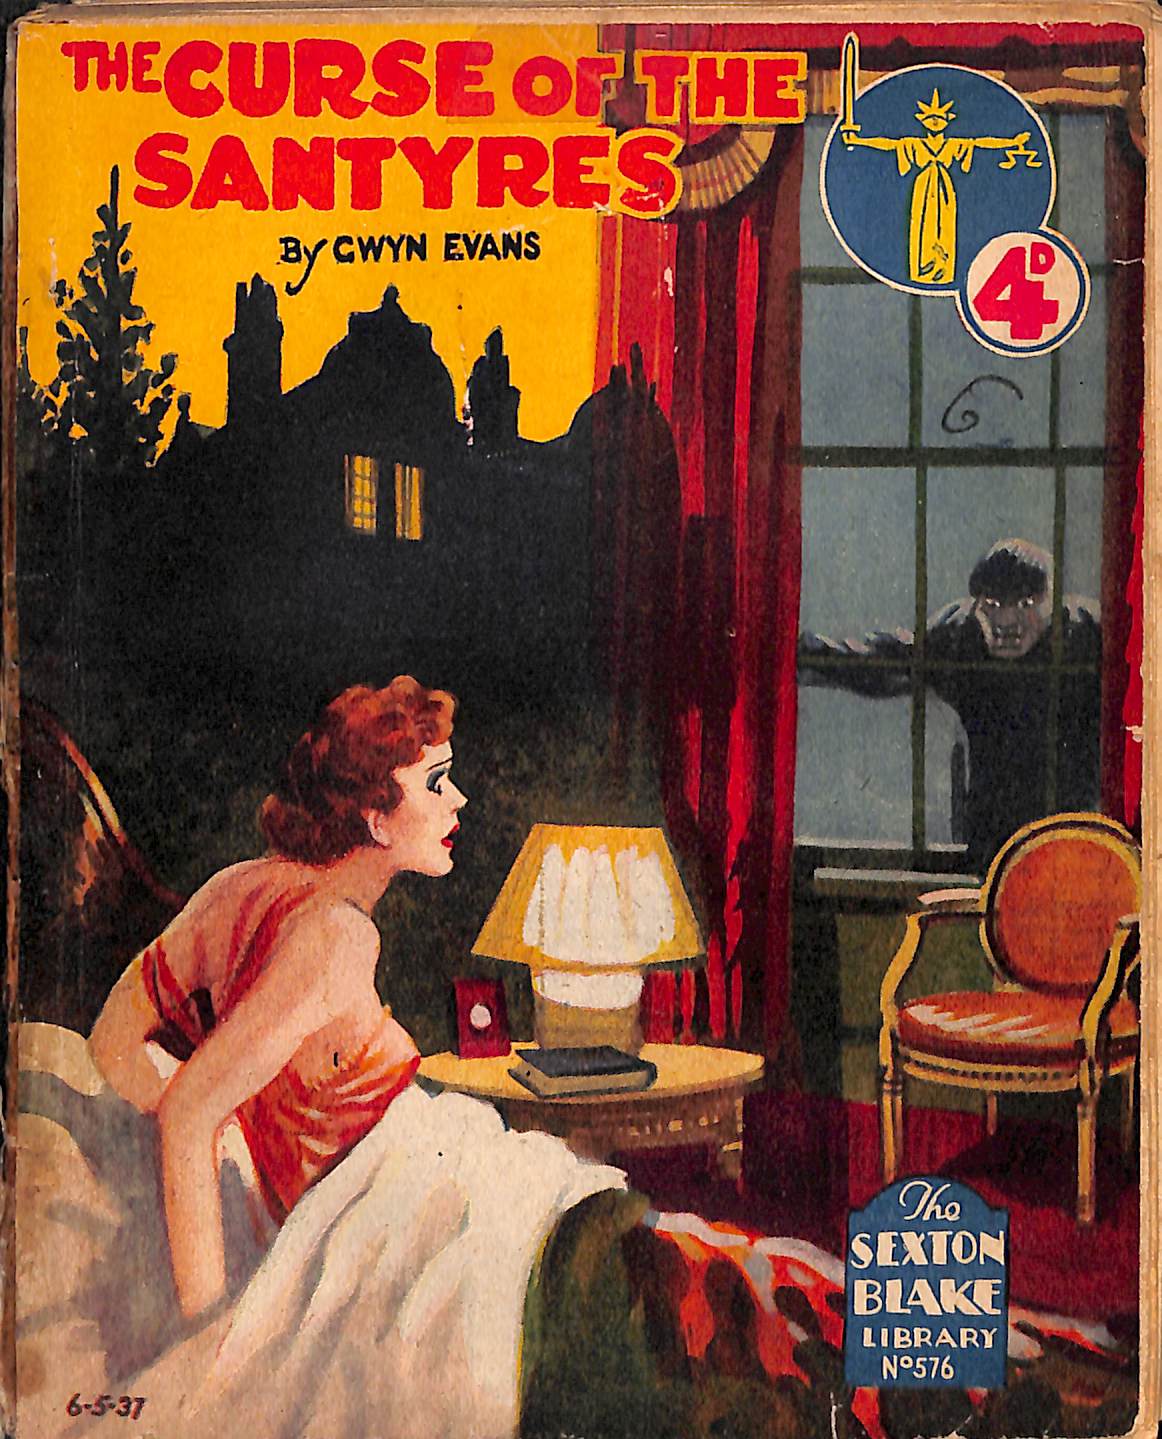 Book Cover For Sexton Blake Library S2 576 - The Curse of the Santyres